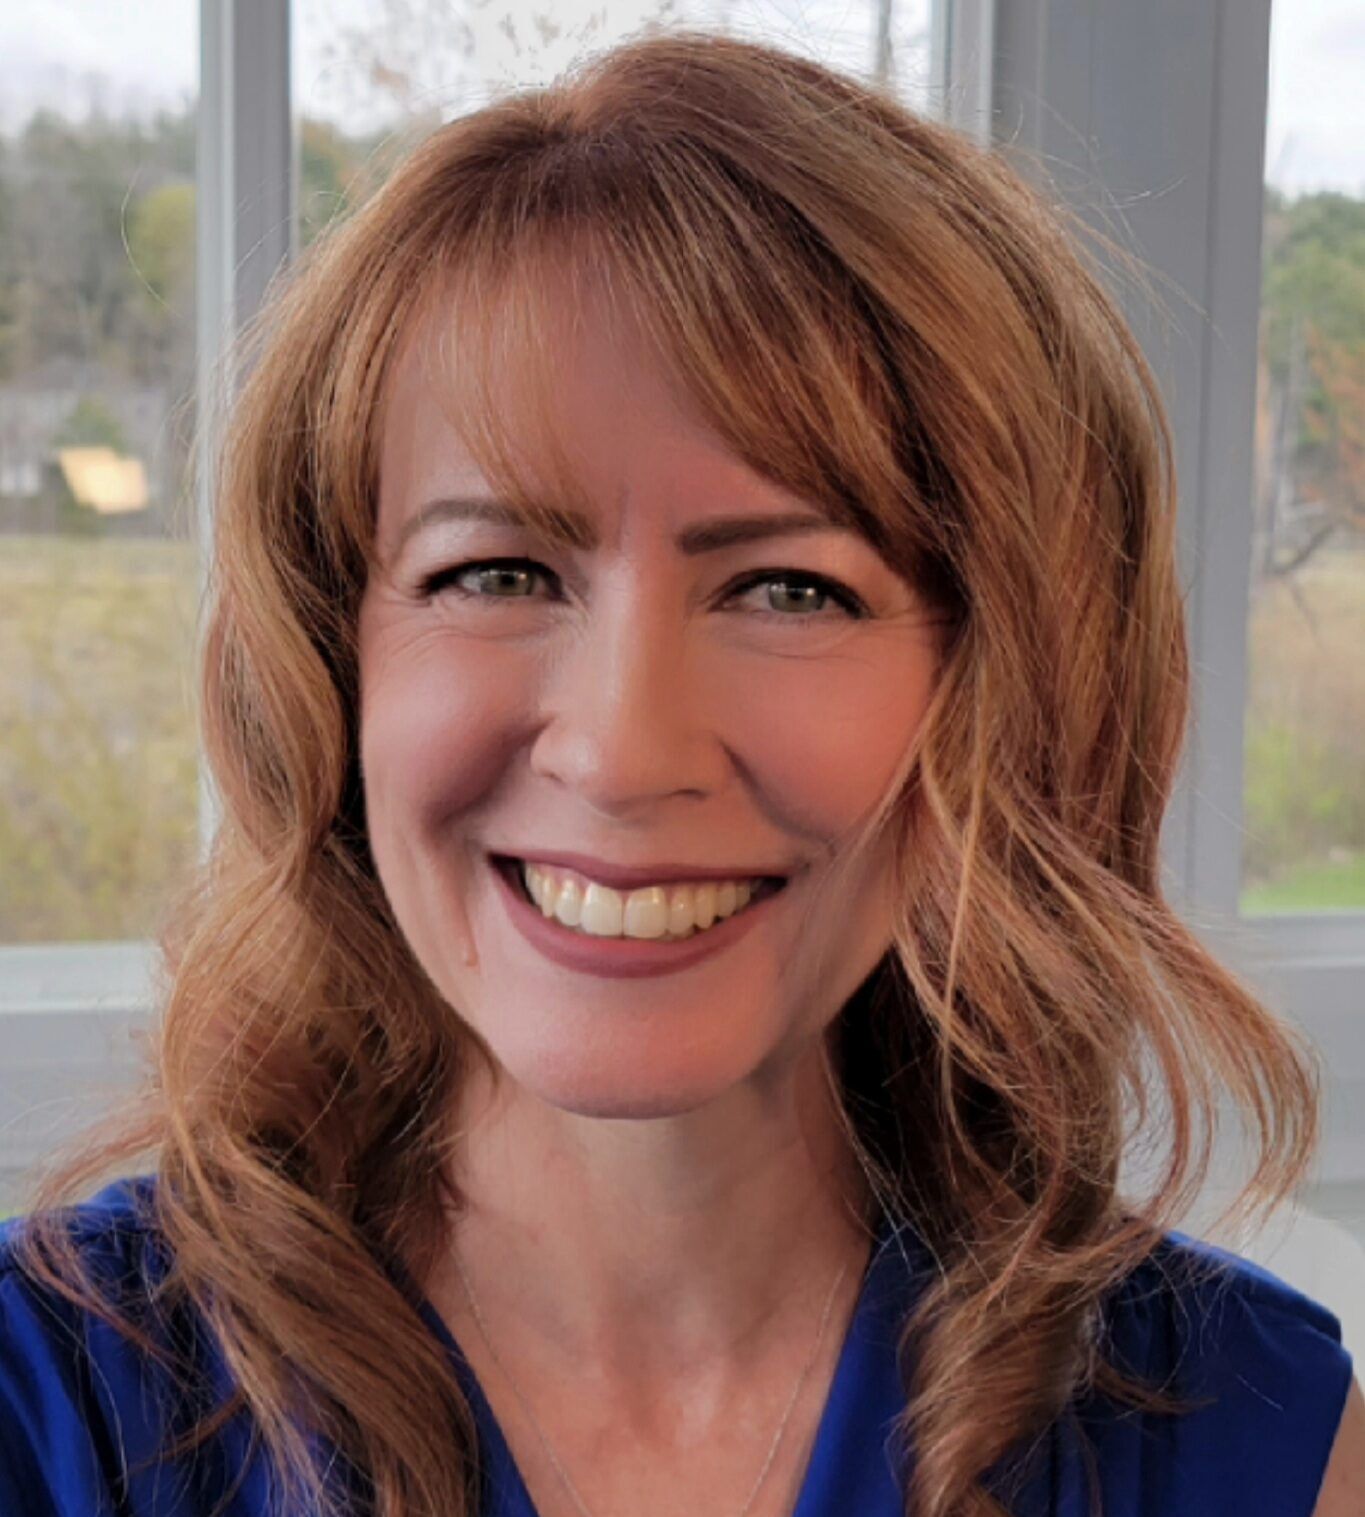 A woman with wavy auburn hair smiles while wearing a blue blouse and a necklace. She is in front of a window with a scenic outdoor background.